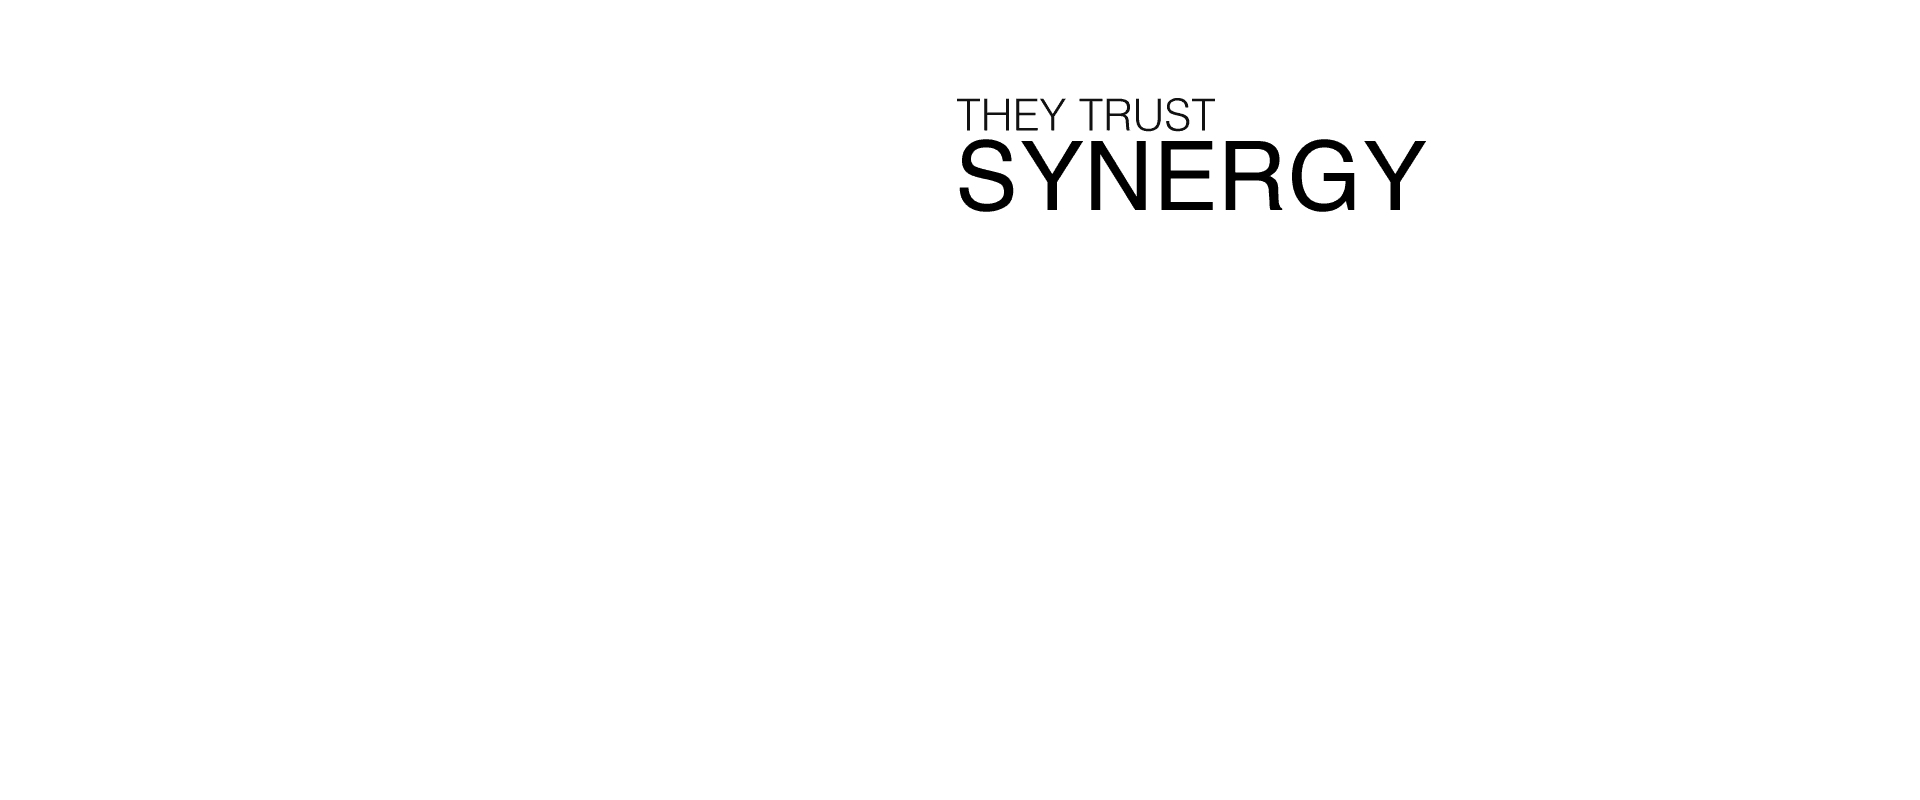 synergy formwork message 1920x800 01 - Coffrages Synergy